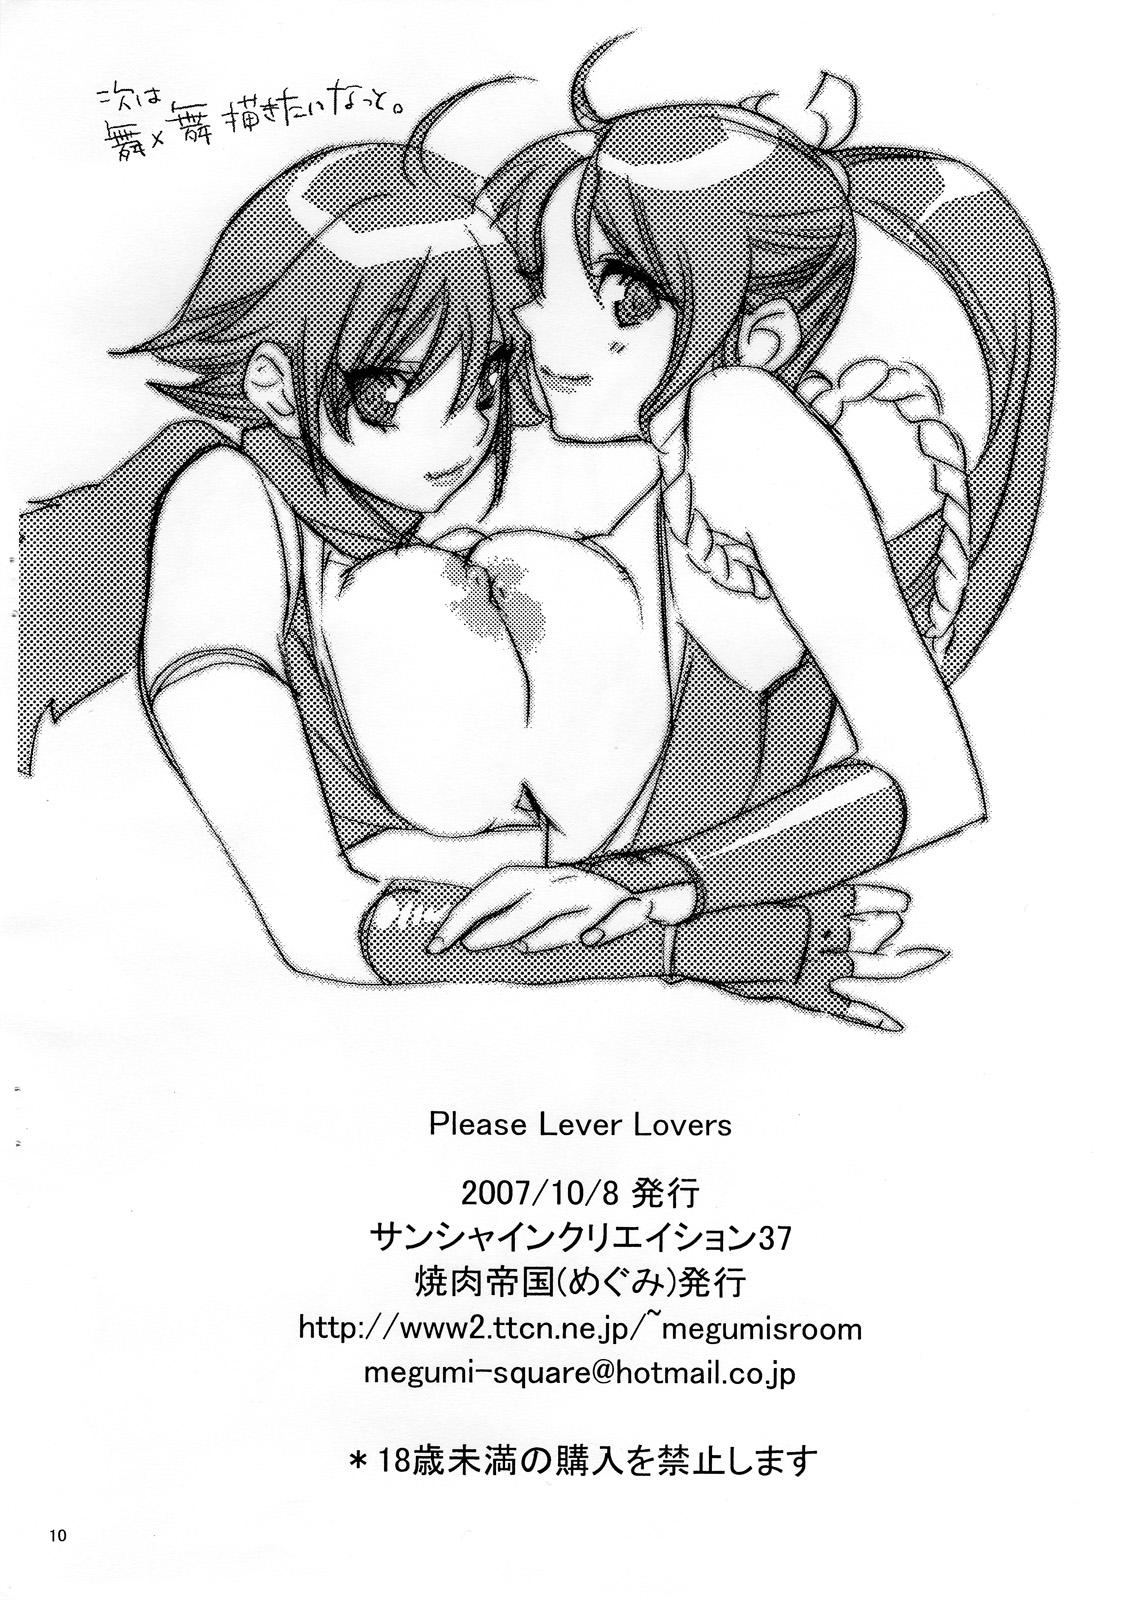 Small Boobs Please Lever Lover - King of fighters Street Fuck - Page 10